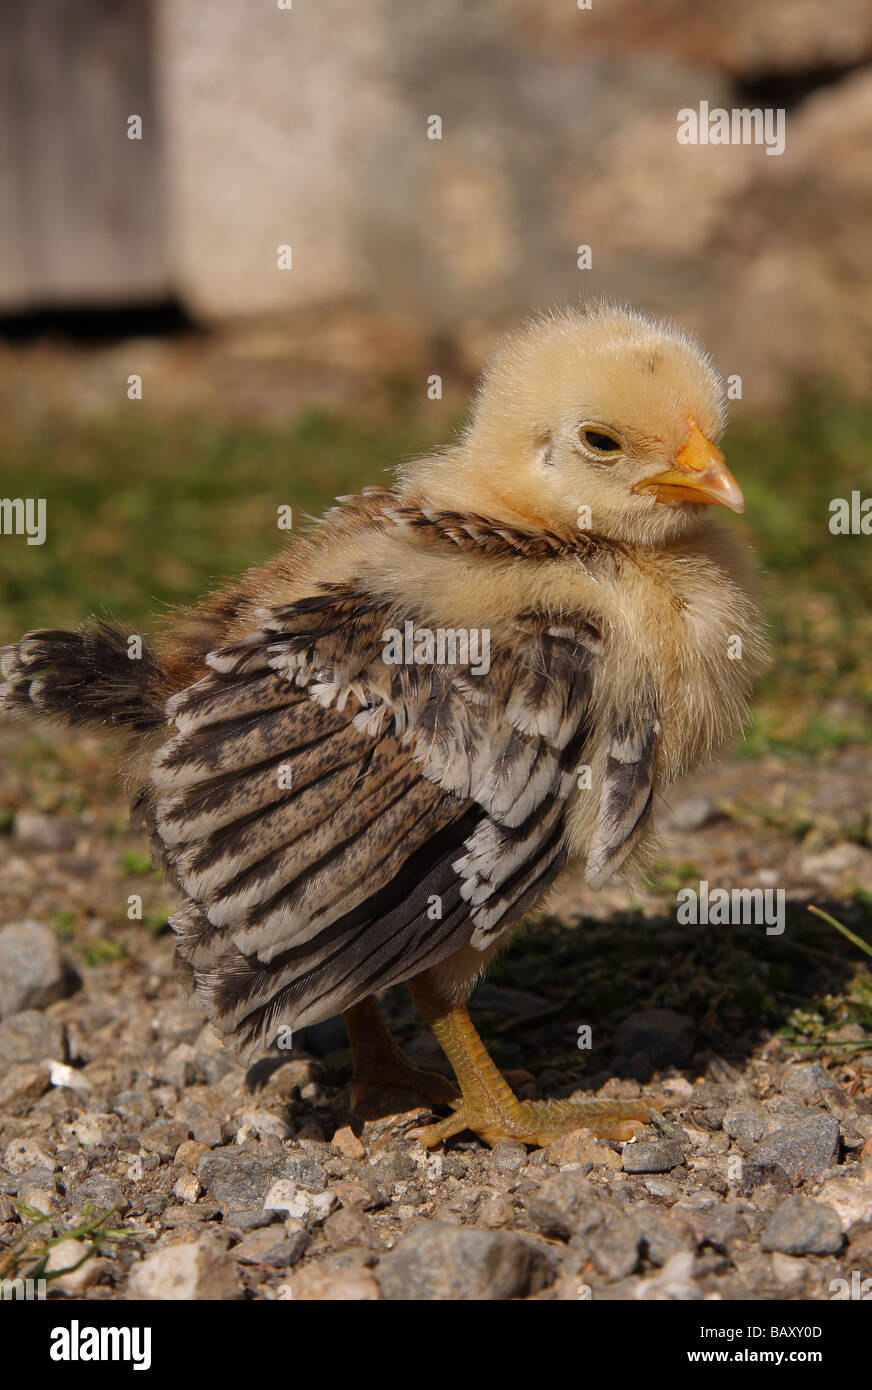 A sick young Bantam chick with its wings drooping Stock Photo